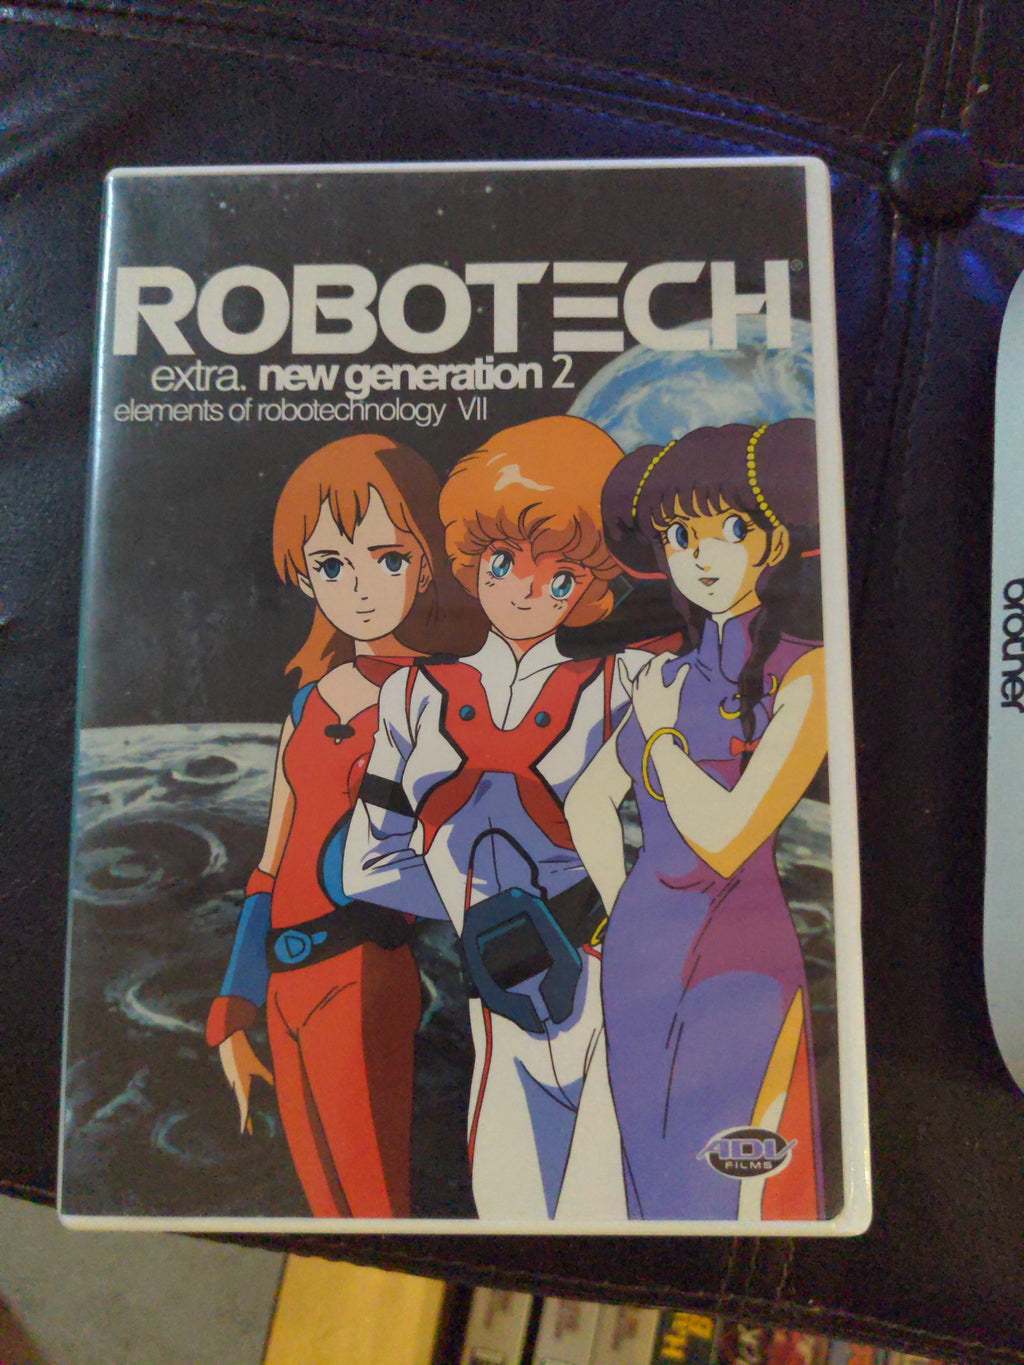 Robotech Extra New Generation 2 DVD Elements of Robotechnology VII Anime 2002